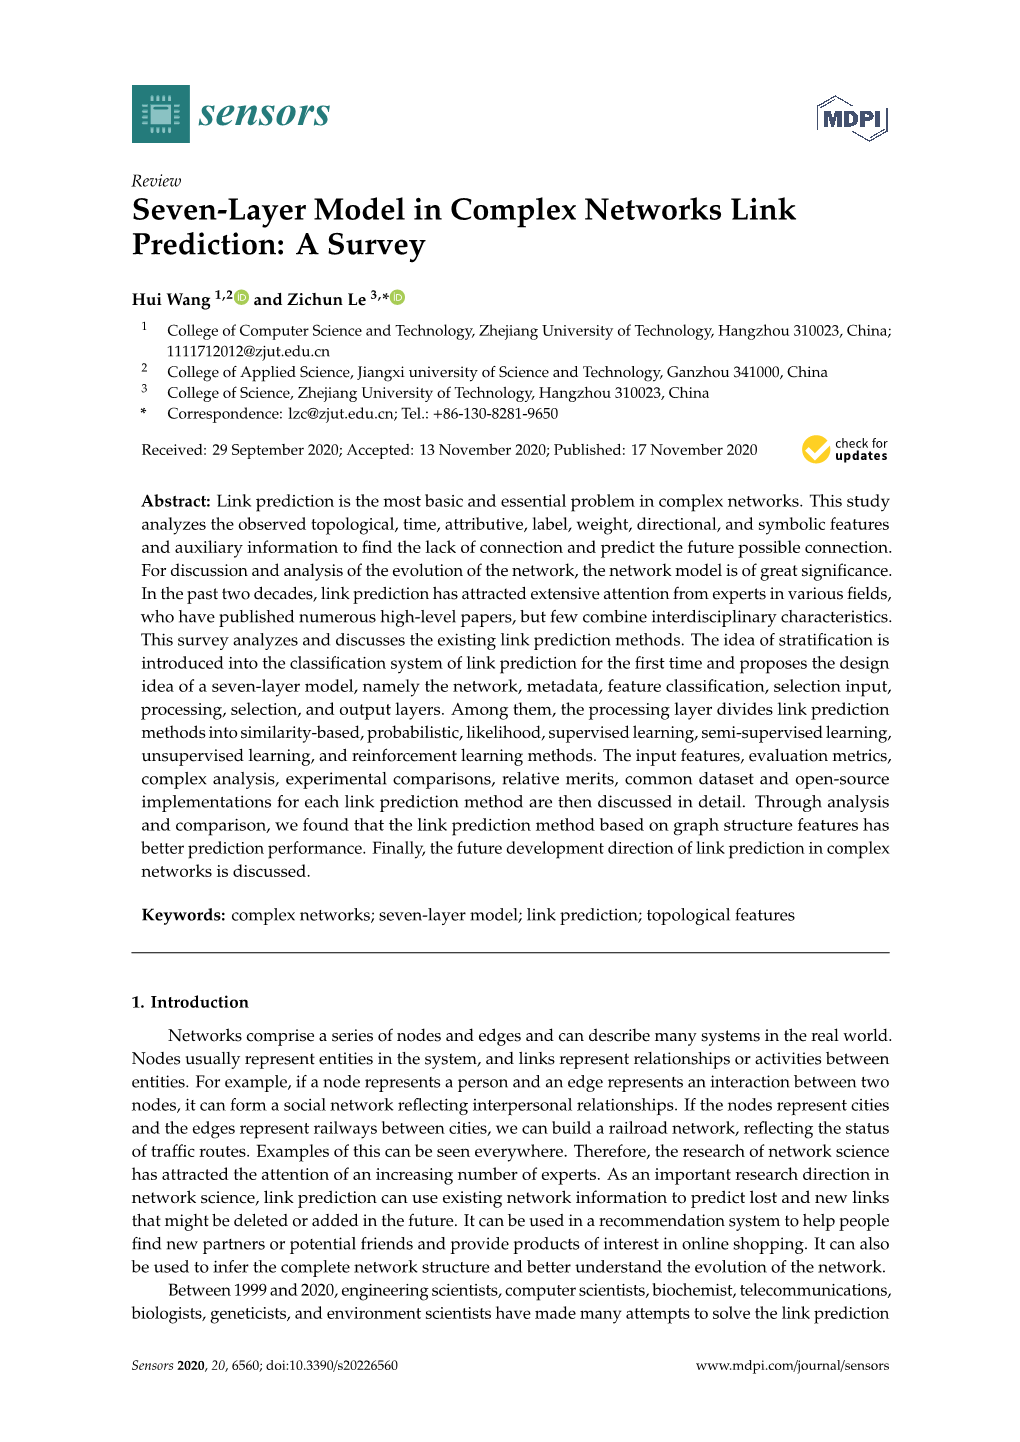 Seven-Layer Model in Complex Networks Link Prediction: a Survey